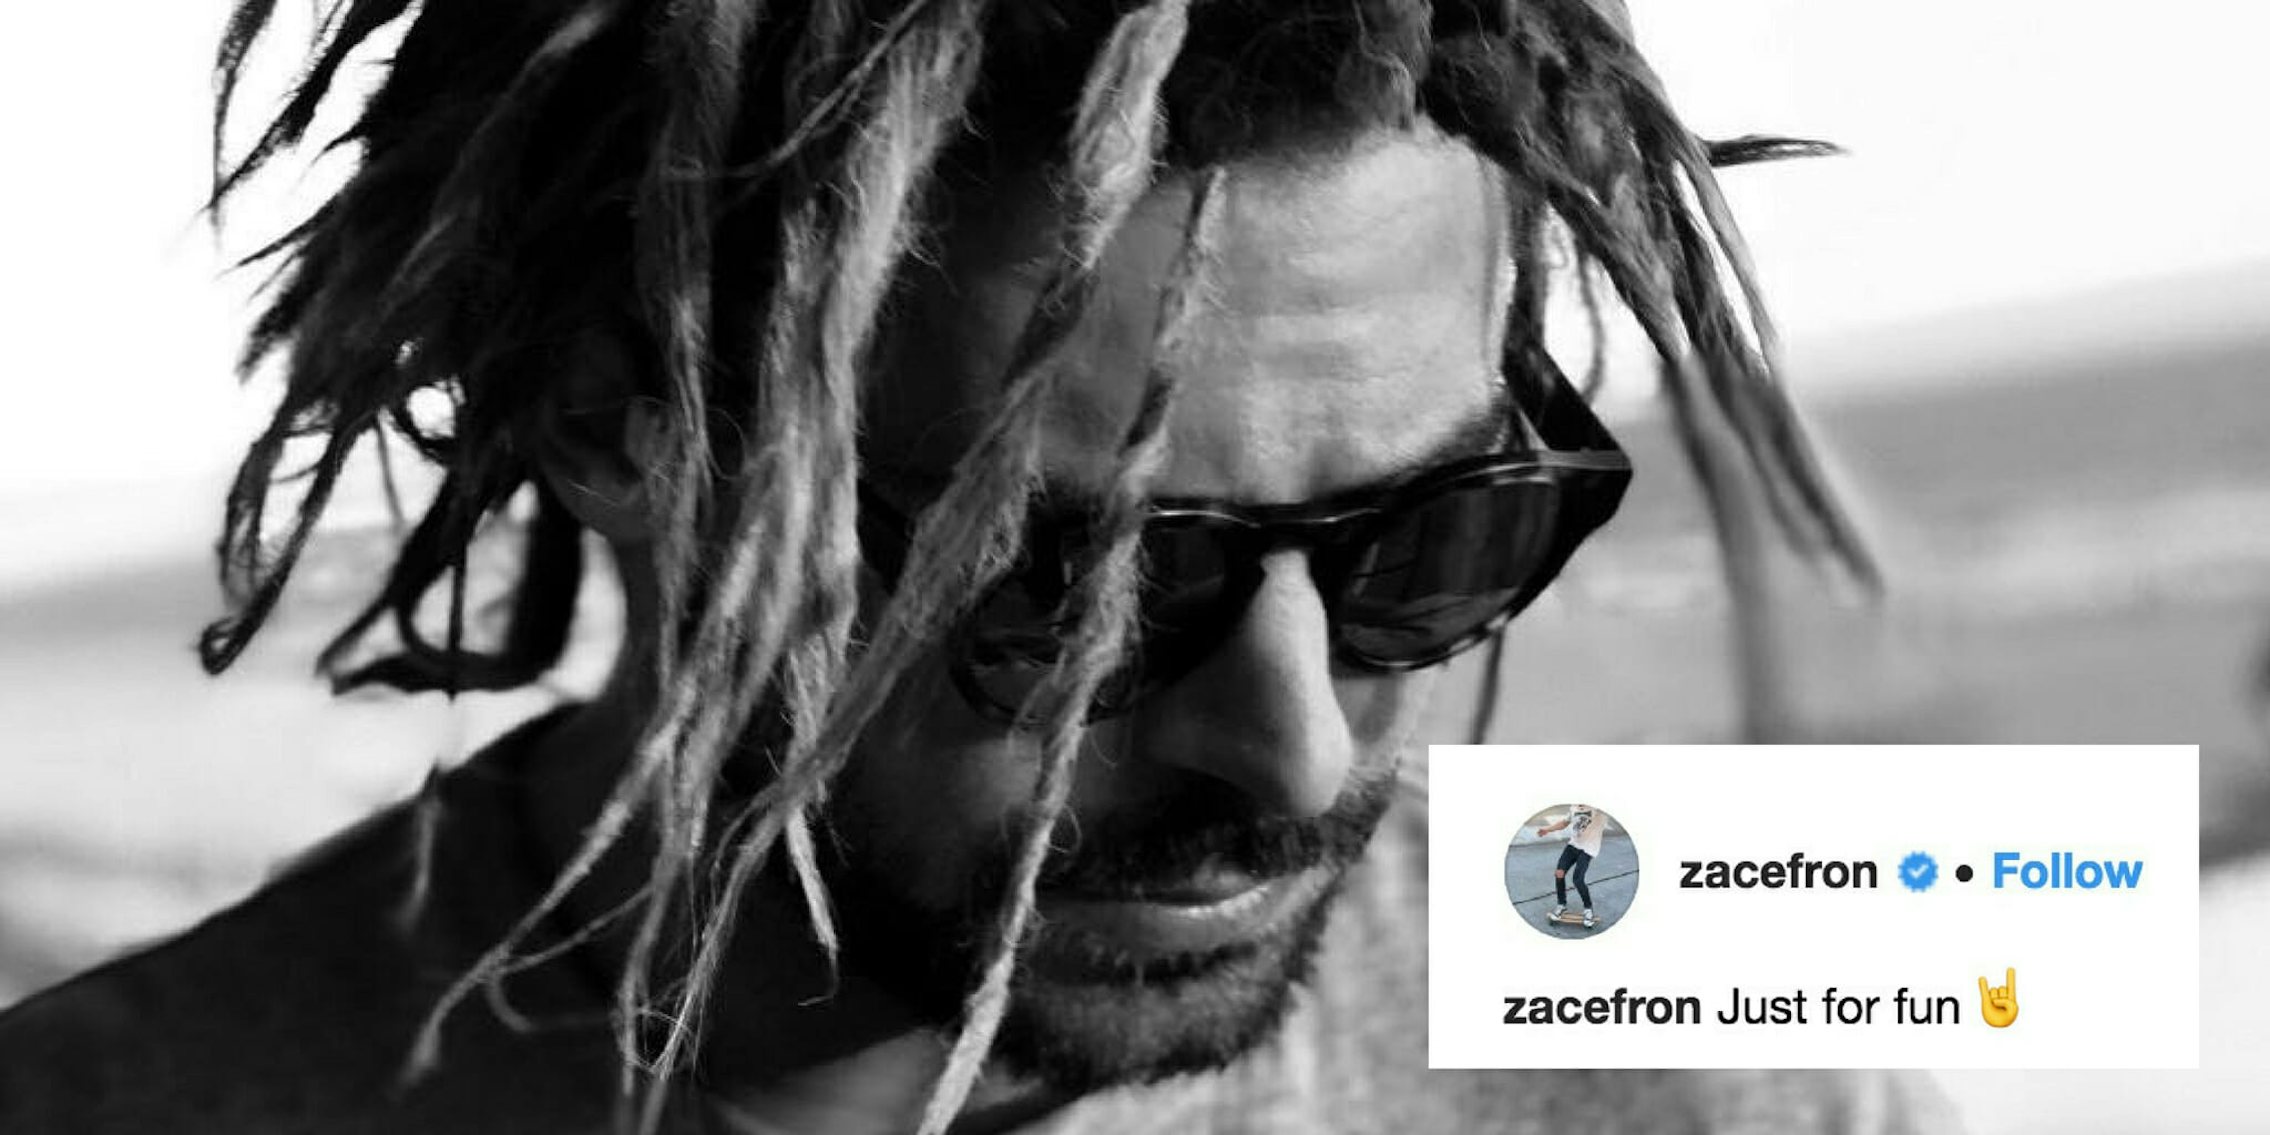 Zac Efron sports dreadlocks with an Instagram caption stating 'Just for fun,' though some accuse him of cultural appropriation.